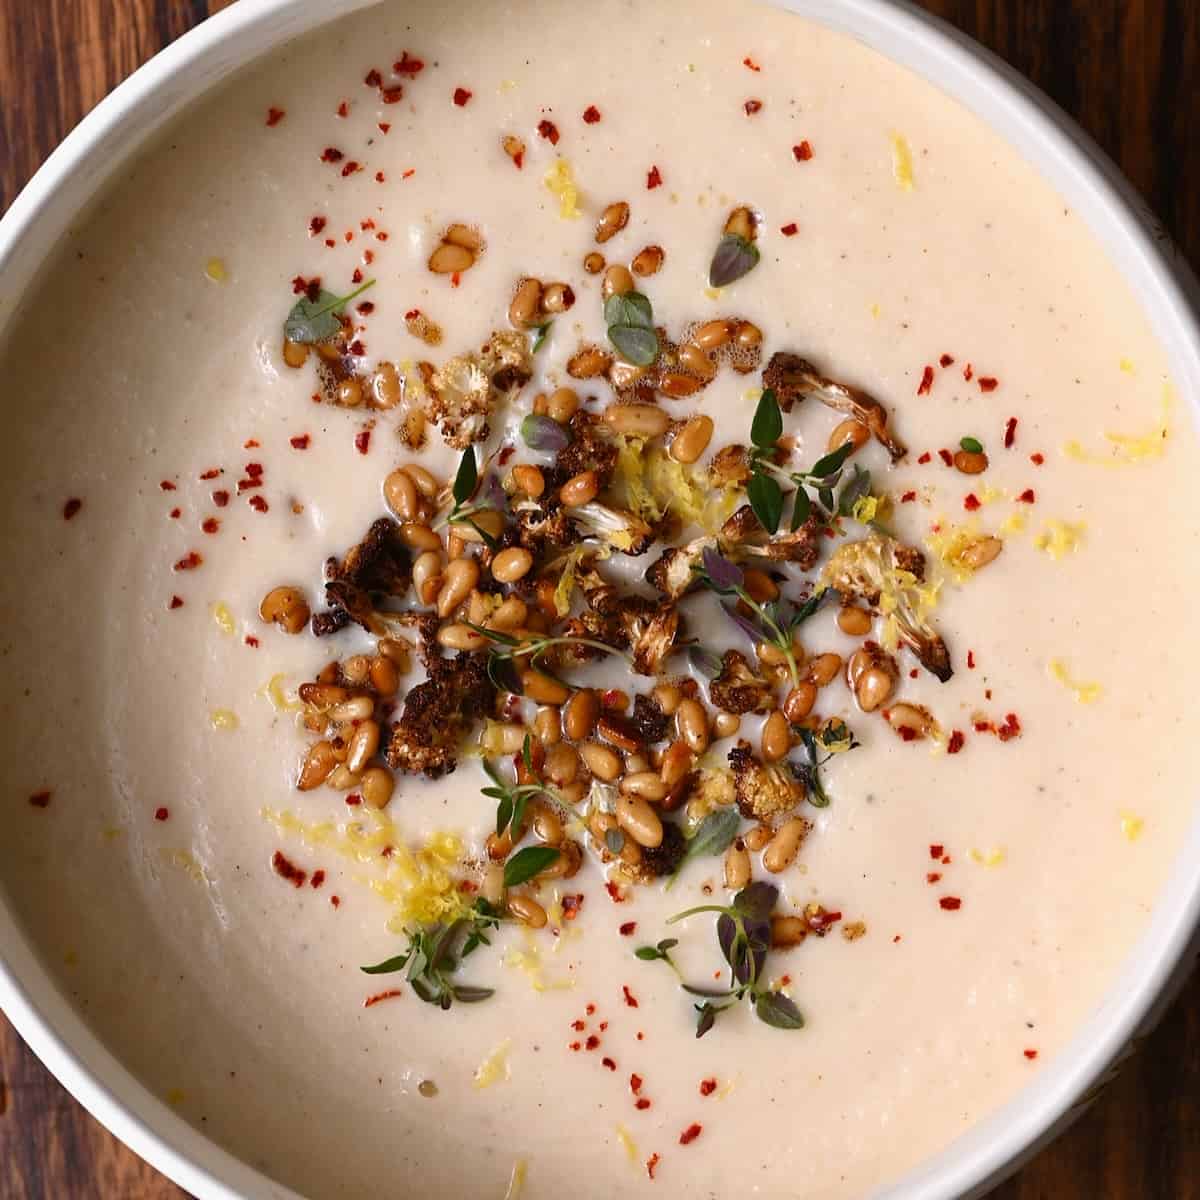 Cauliflower soup topped with pine nuts and lemon zest